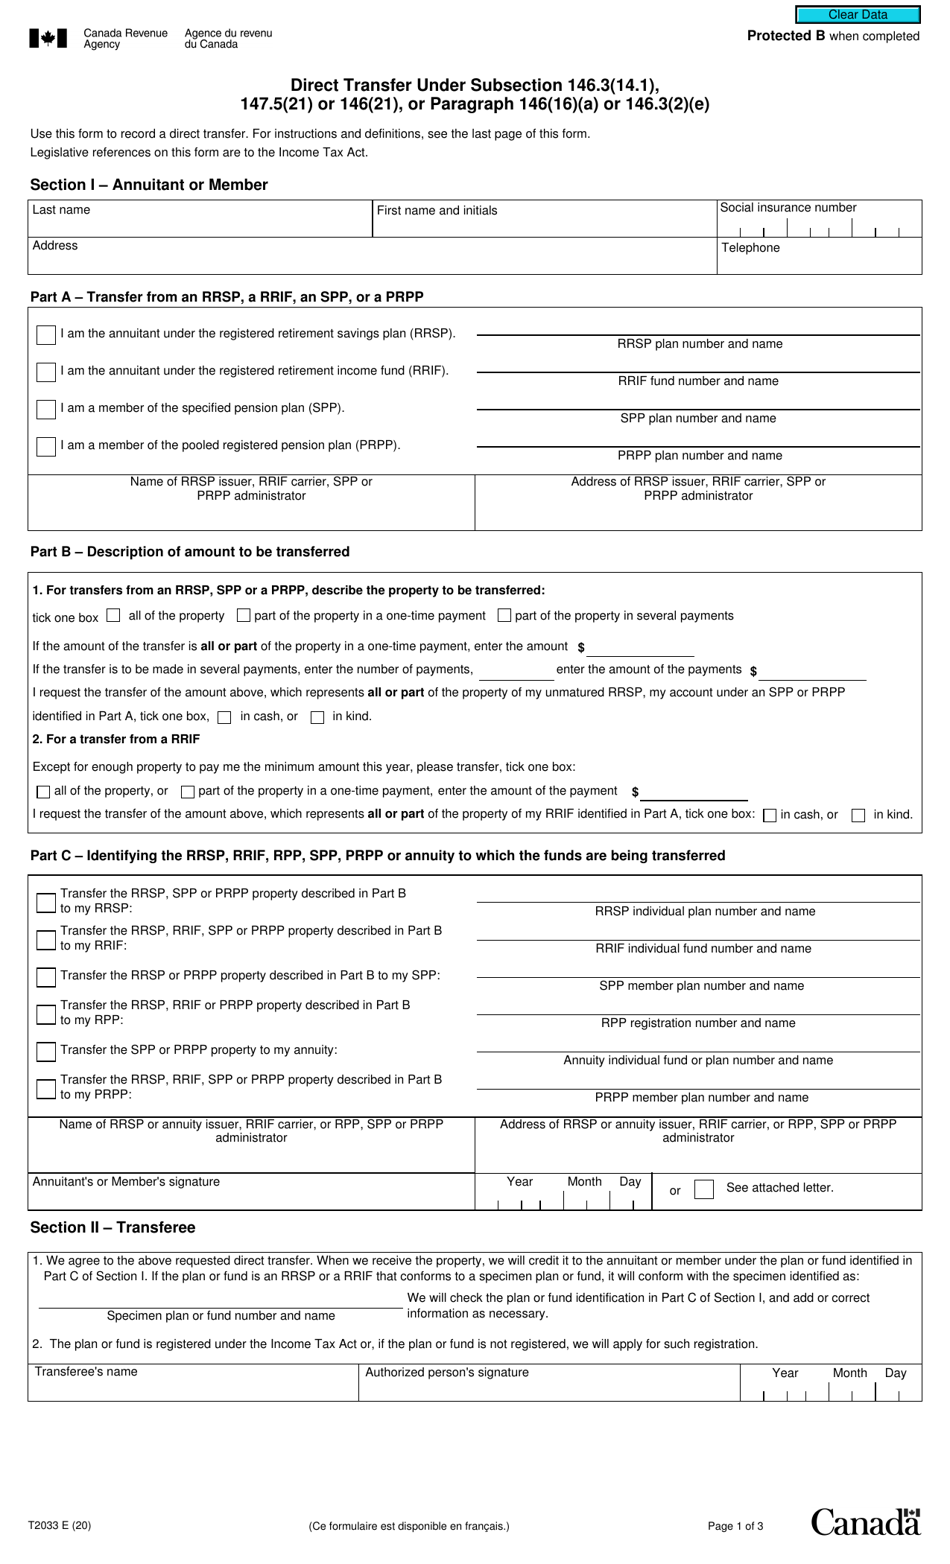 Form T2033 Direct Transfer Under Subsection 146.3(14.1), 147.5(21) or 146(21), or Paragraph 146(16)(A) or 146.3(2)(E) - Canada, Page 1